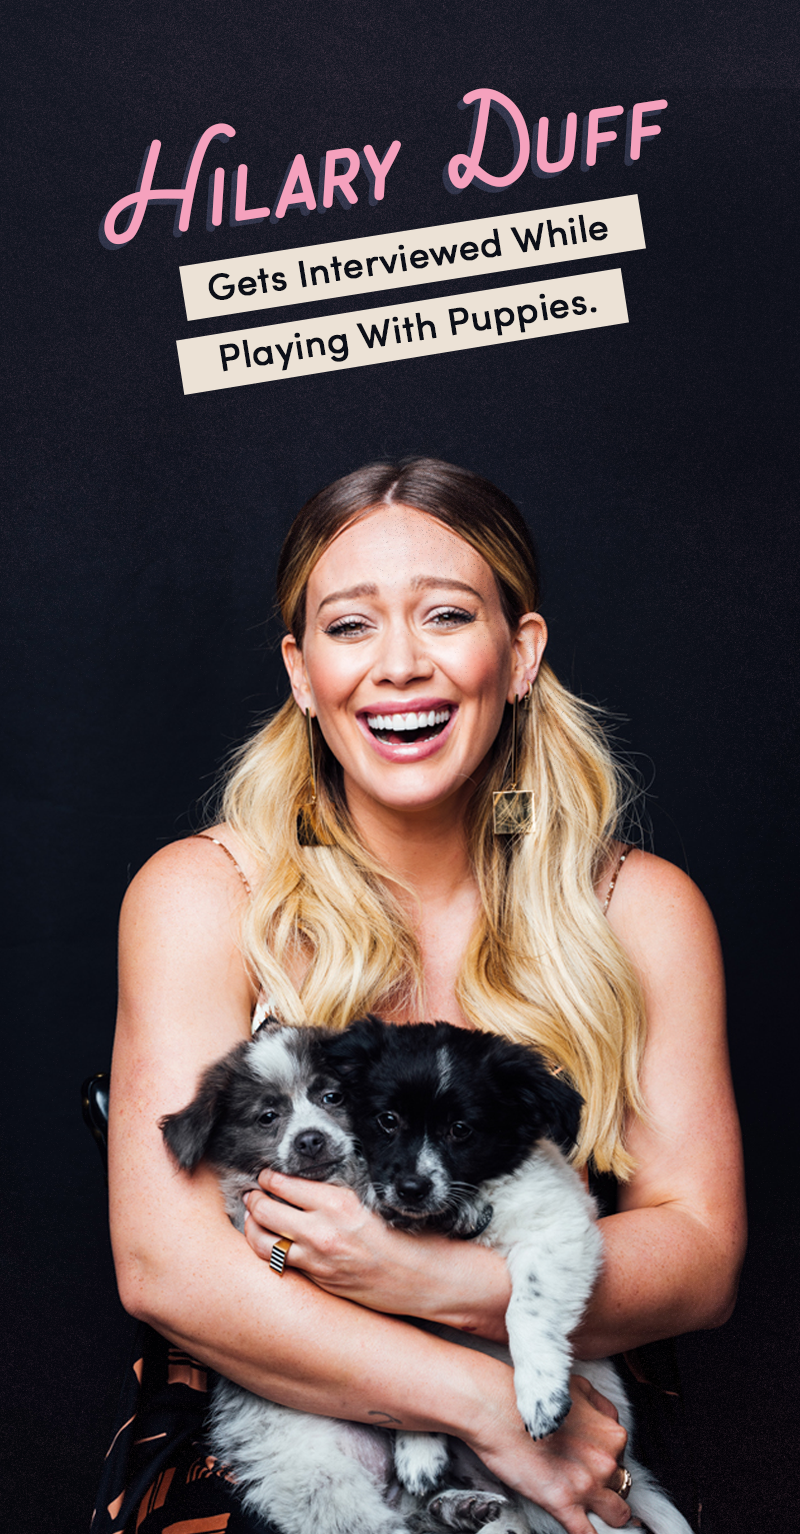 hilary duff puppies final.png